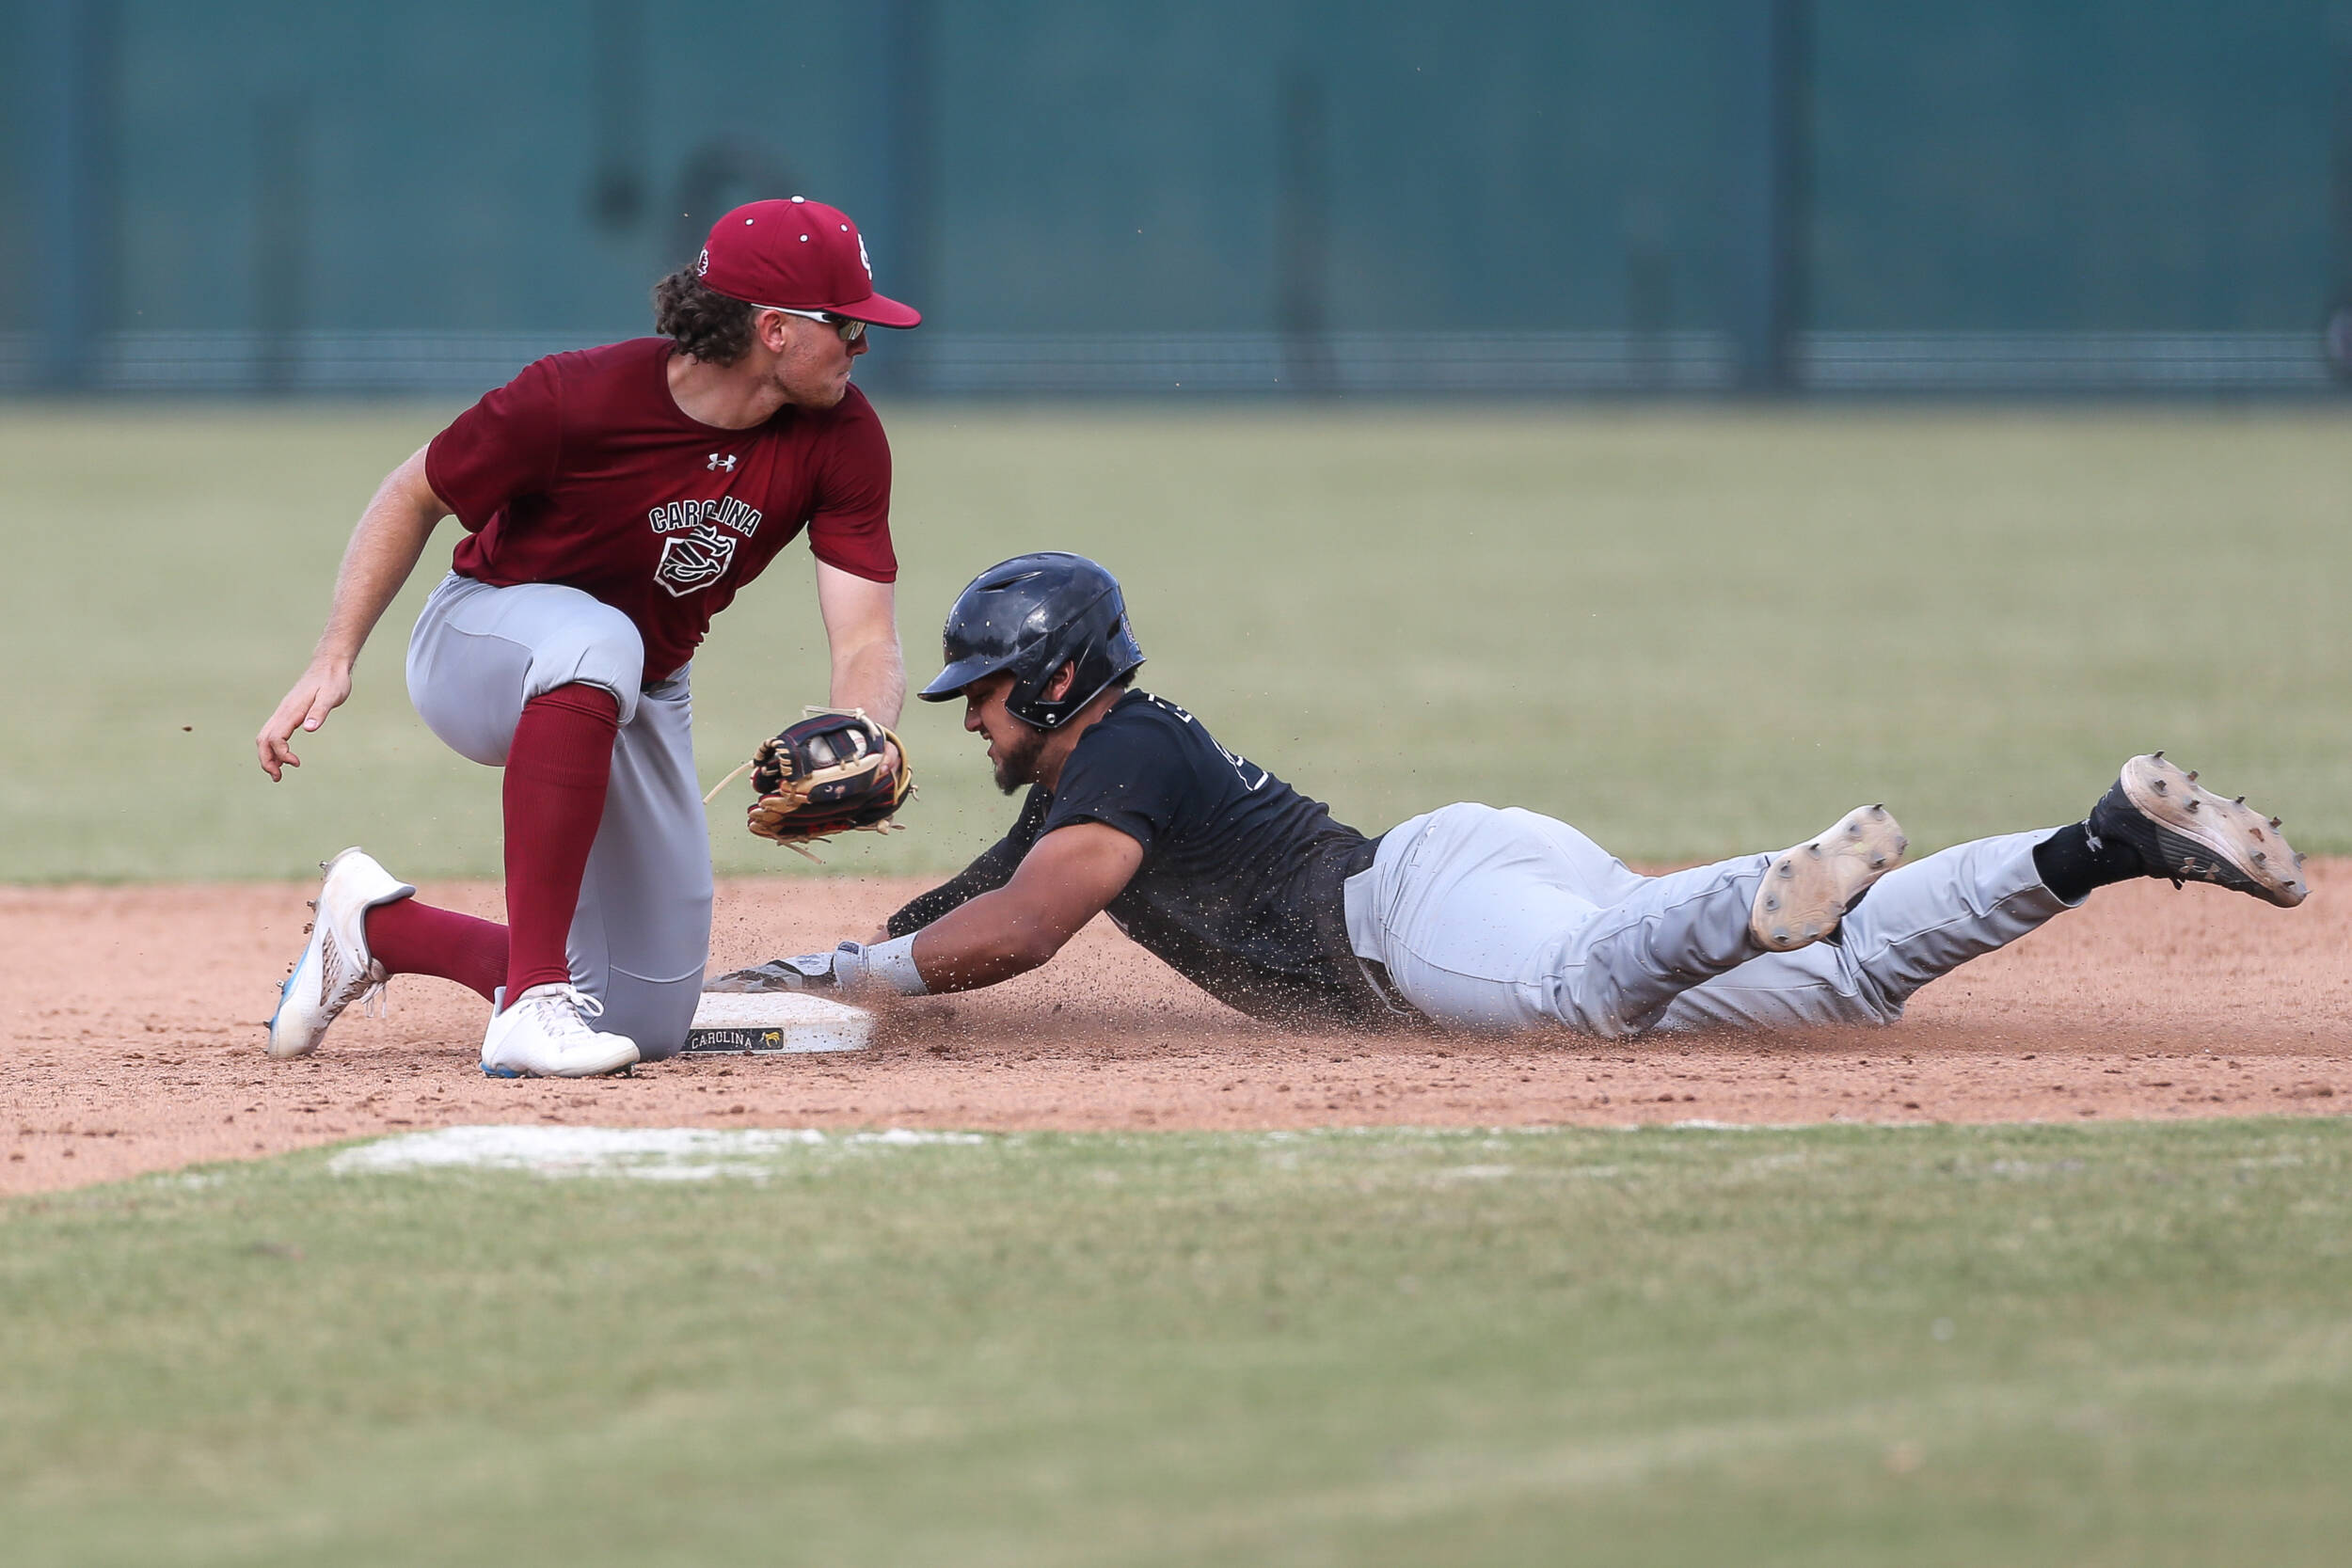 Garnet and Black World Series to Close out Baseball's Fall Practice